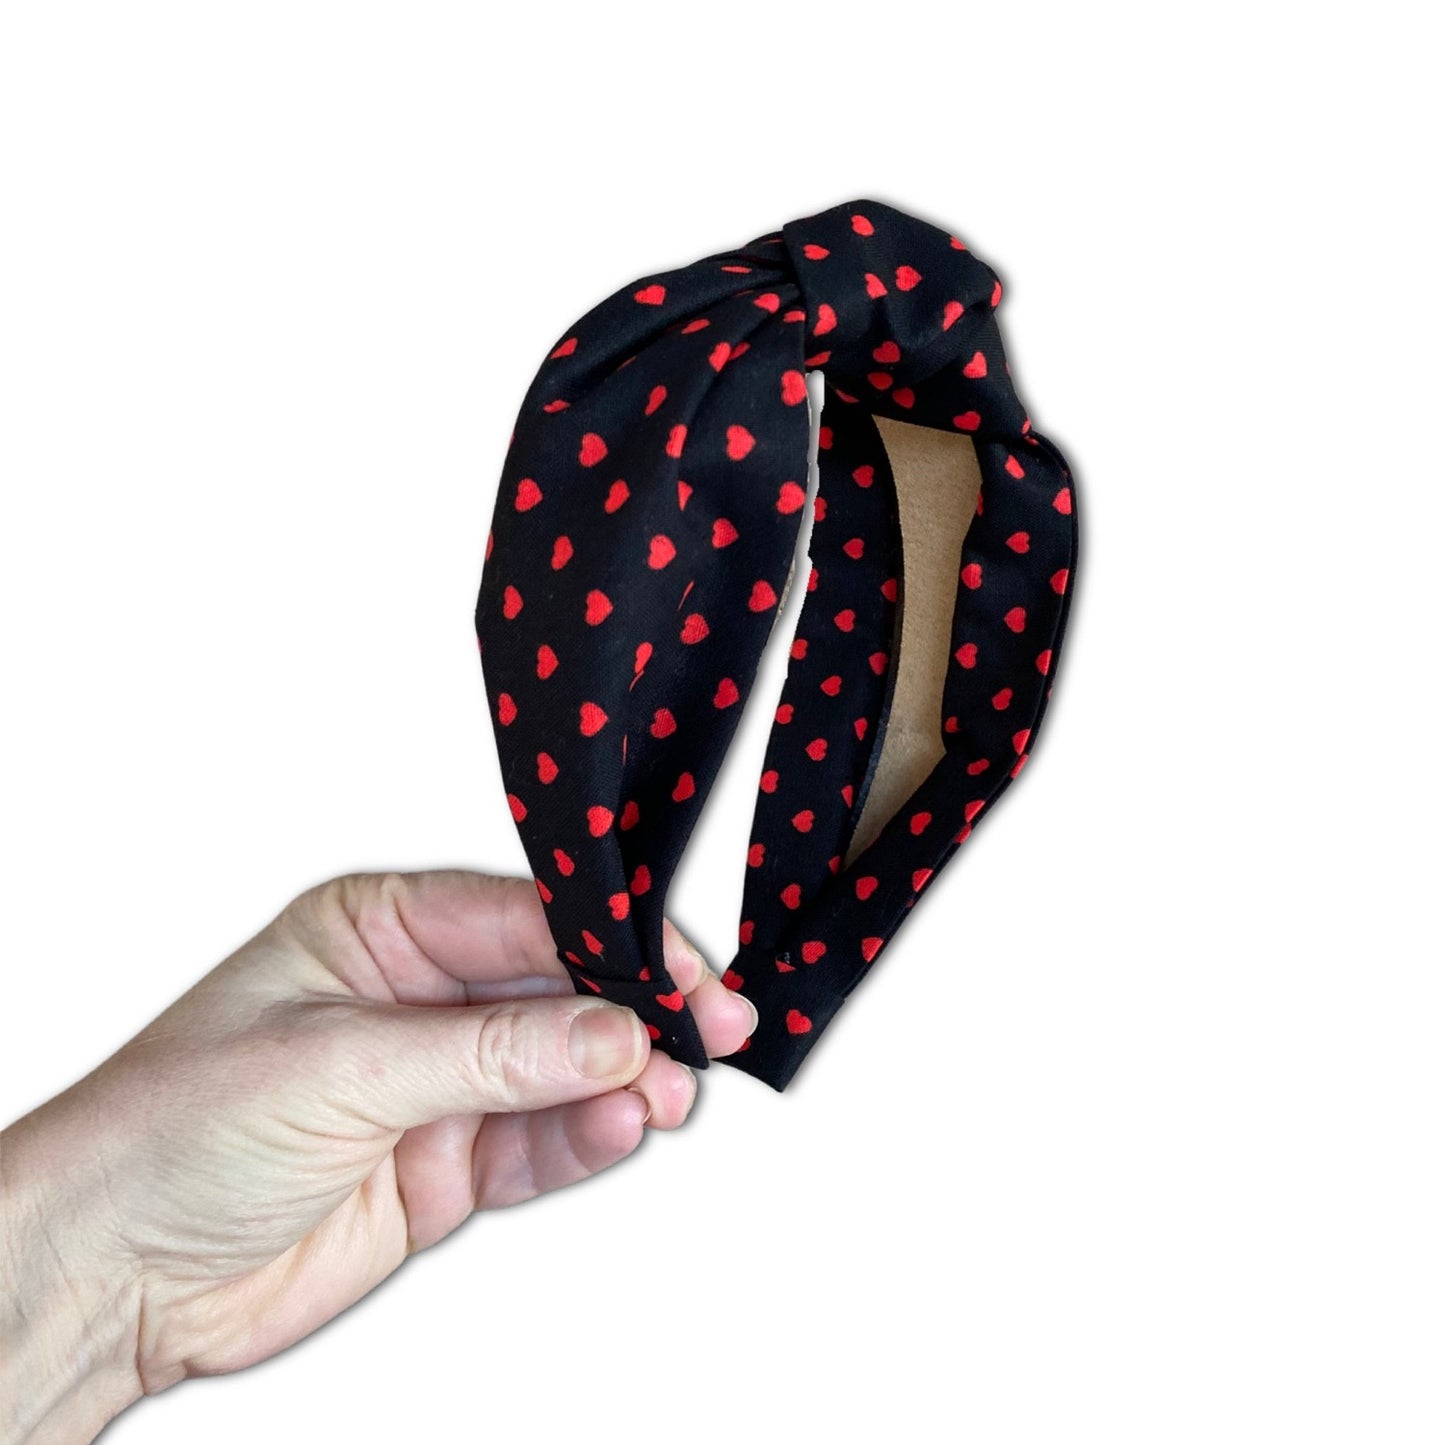 Headband with mini red heart polka dots with a black background